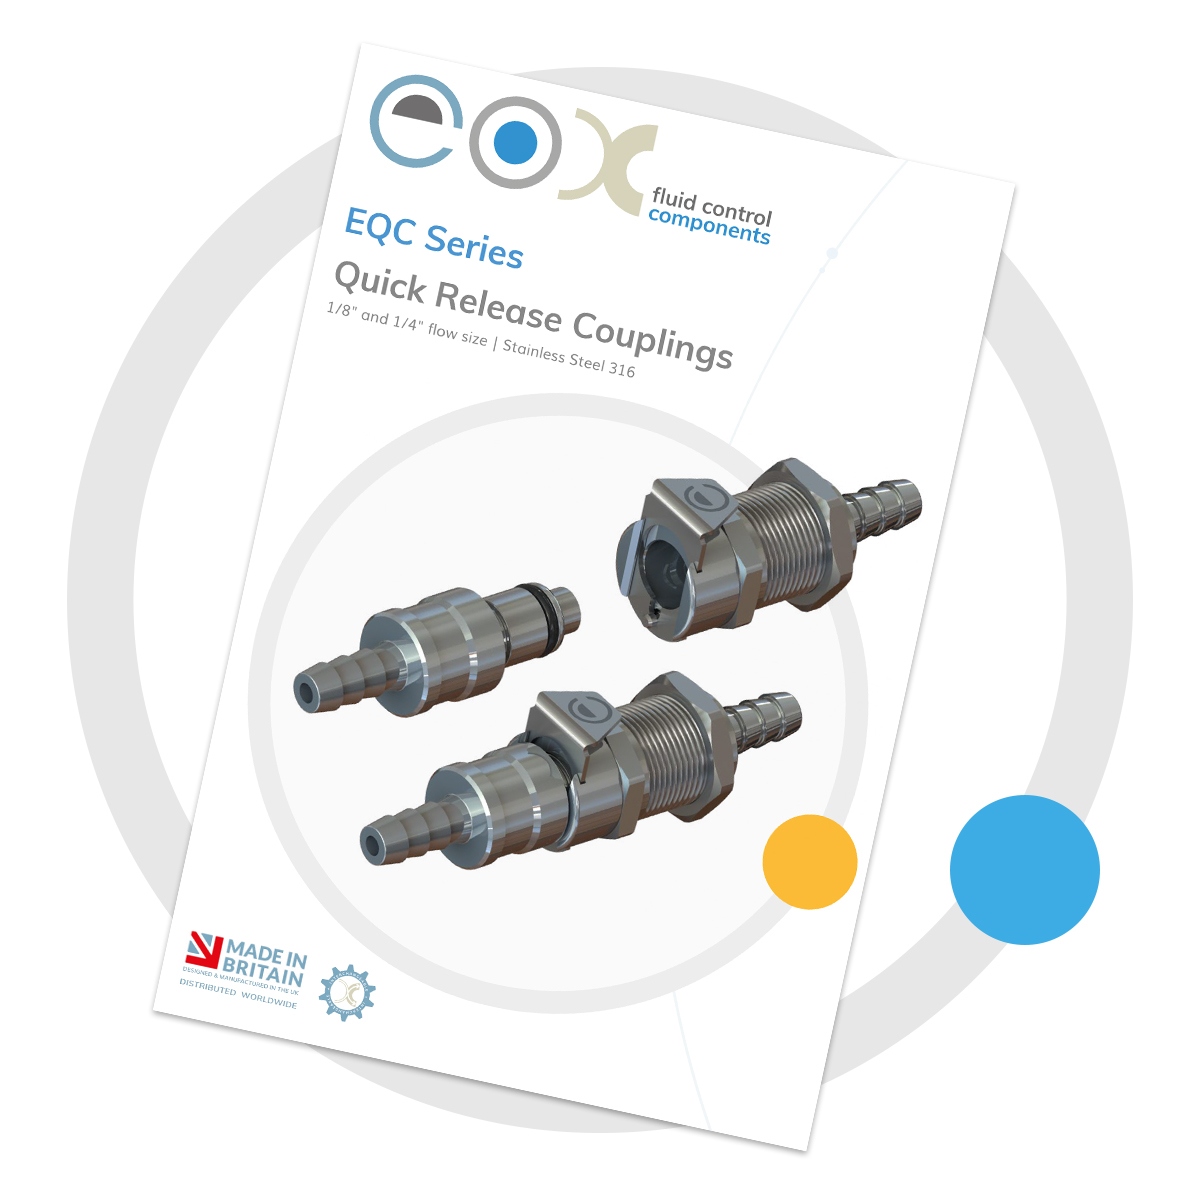 Click to download our modular check valve flyer